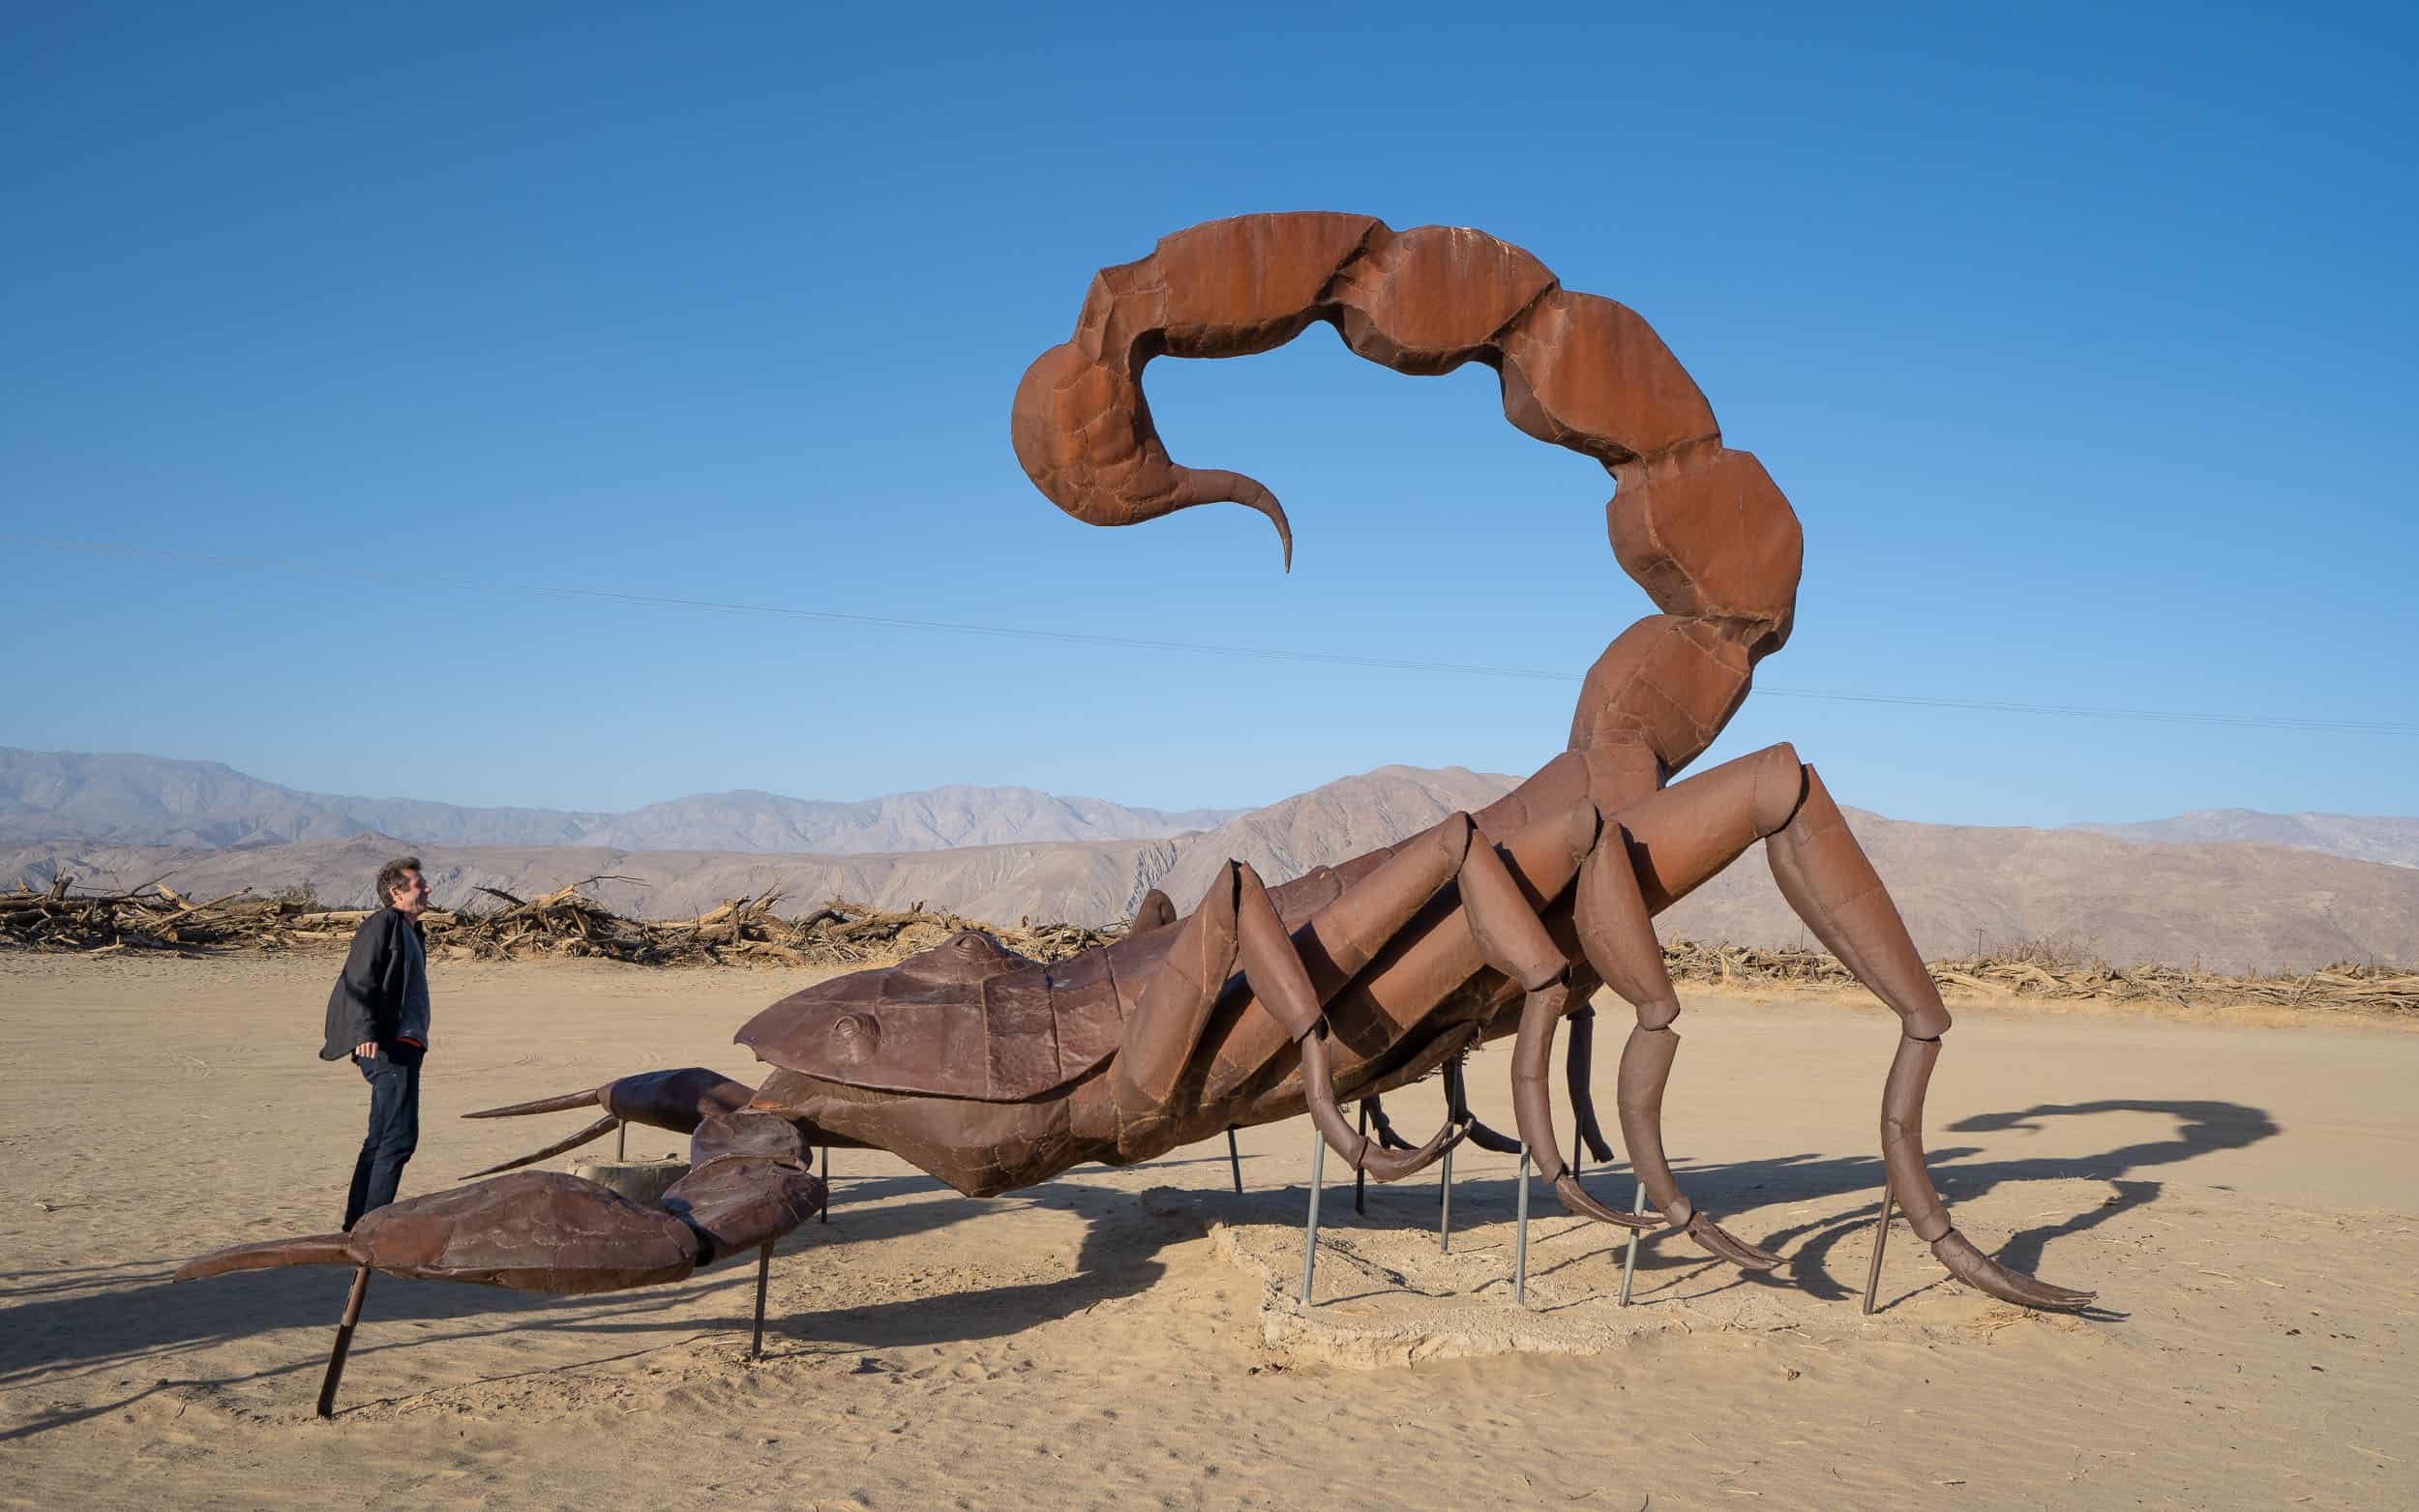 The scorpion is one of the best Borrego Springs sculptures in the desert of California